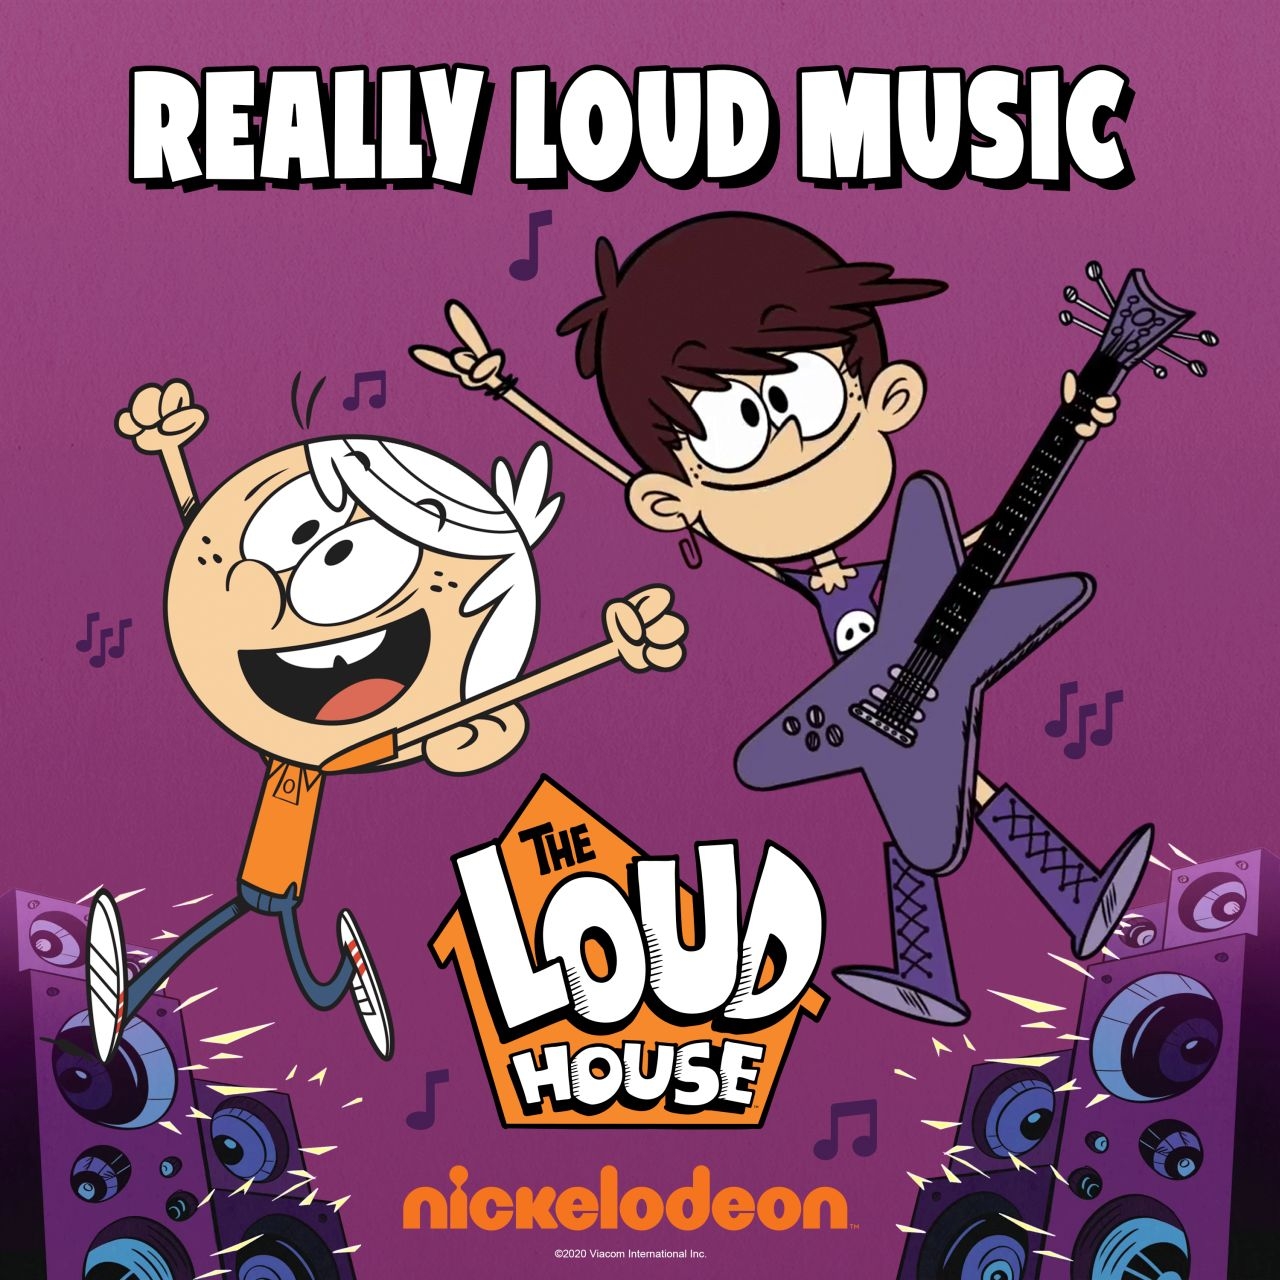 Nickelodeon Releases The Loud House Digital Album Animation